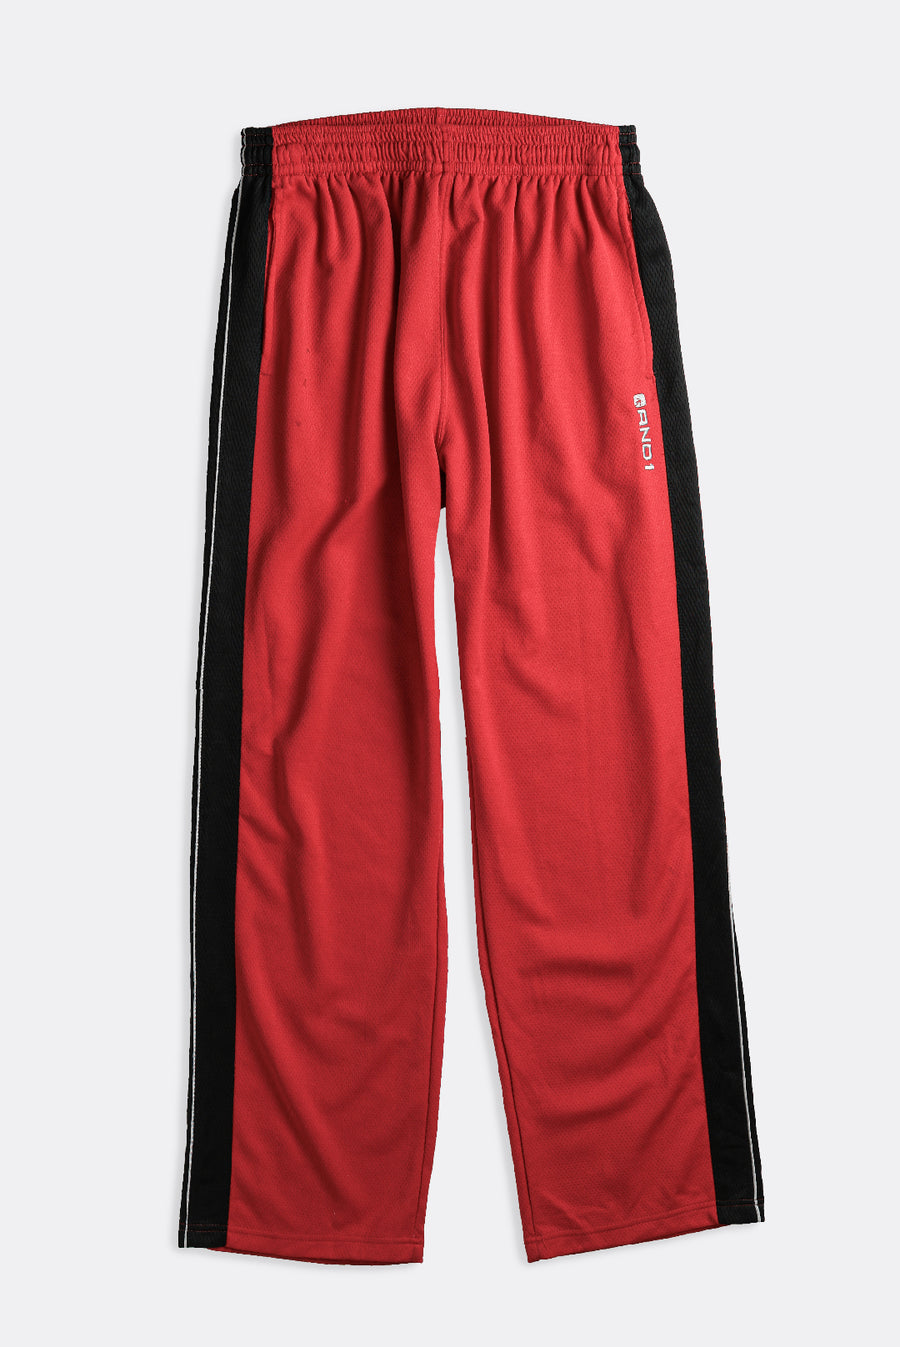 Vintage AND1 Track Pants - M